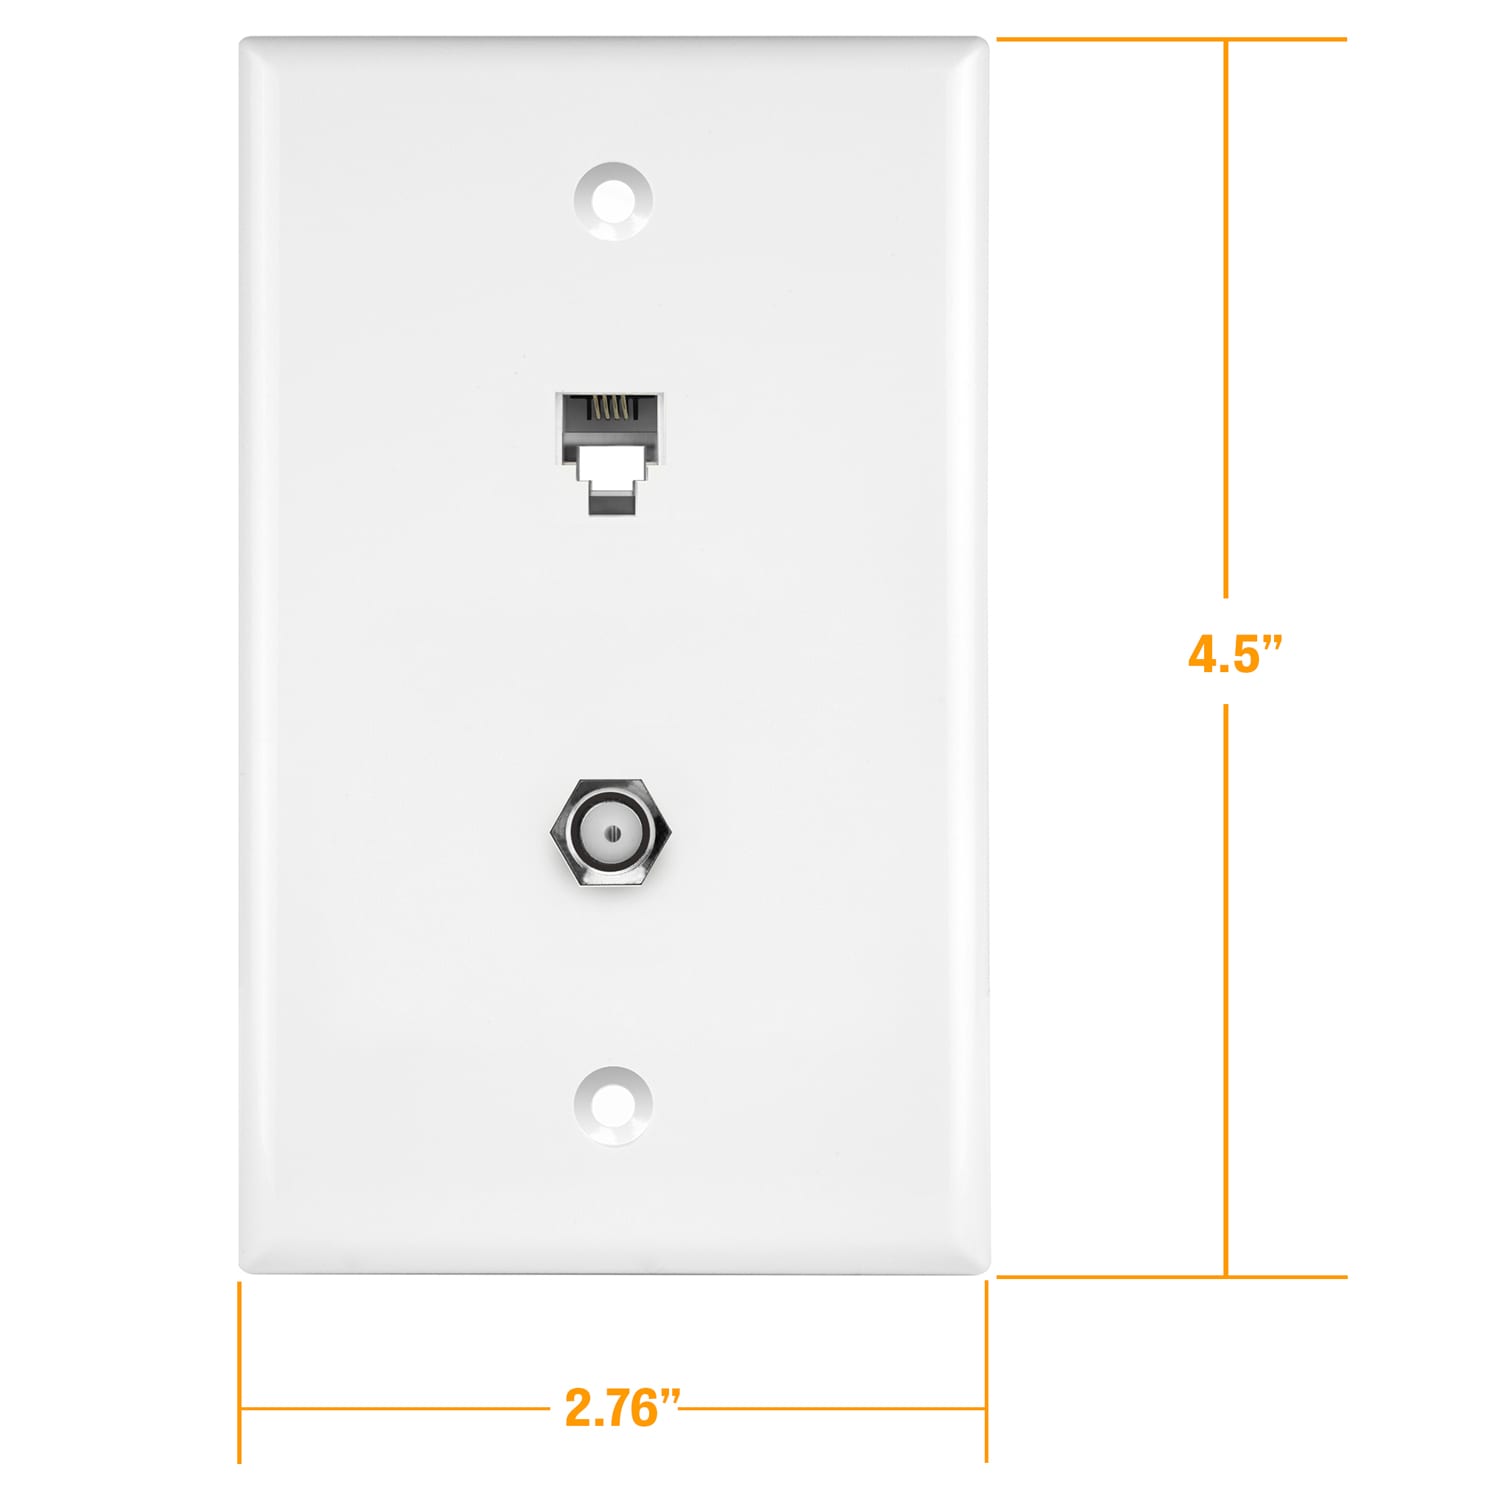 1-Gang RJ11 Telephone Jack 6P4C and F-Type Coaxial Cable Wall Plate